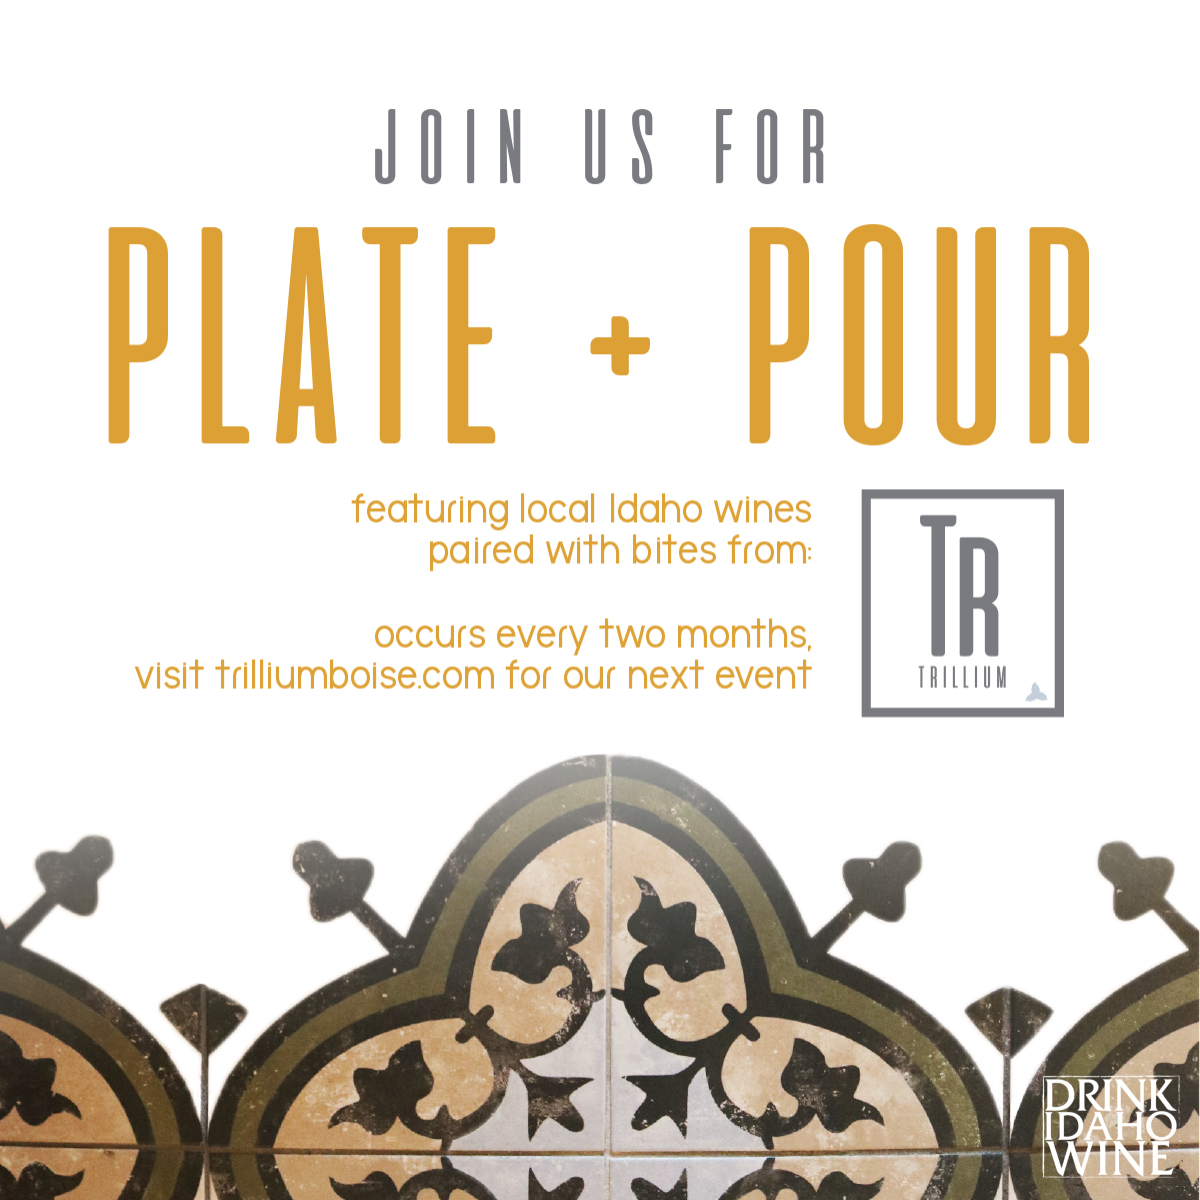 Plate and pour event at trillium